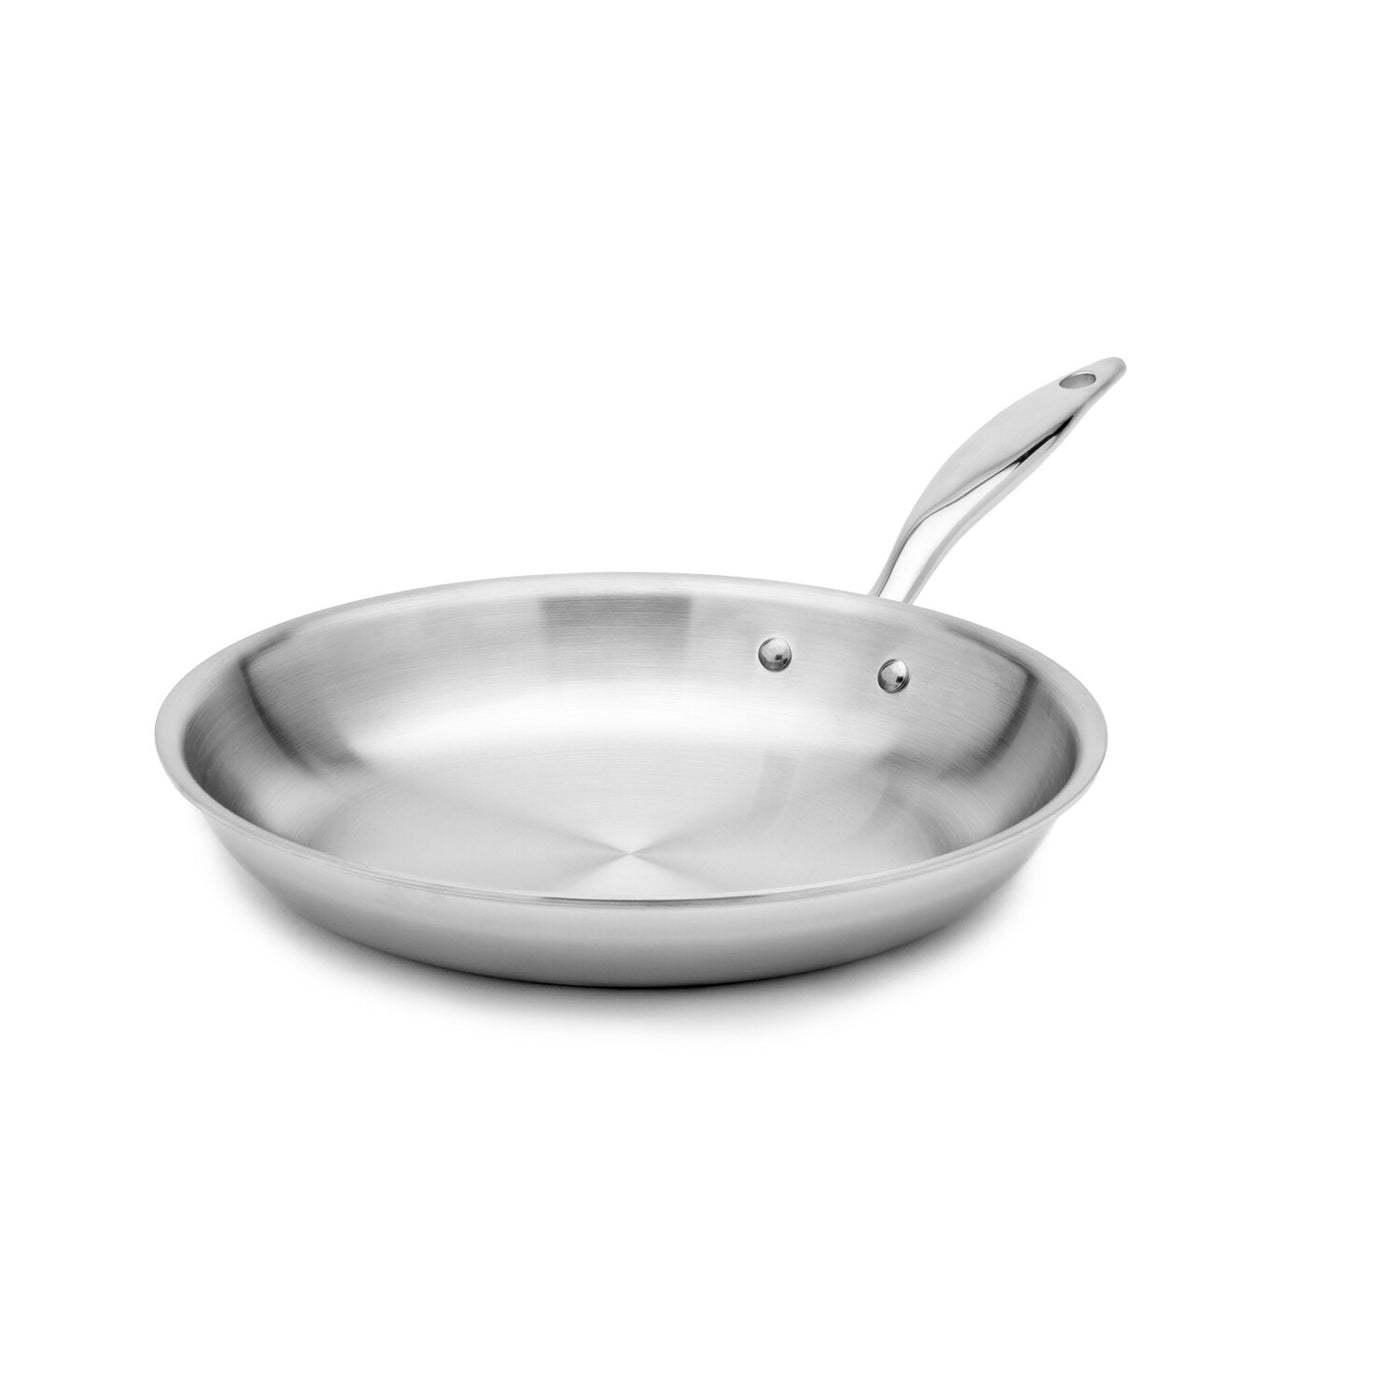 All-Clad Factory Seconds: 12 D3 Fry Pan / Stainless